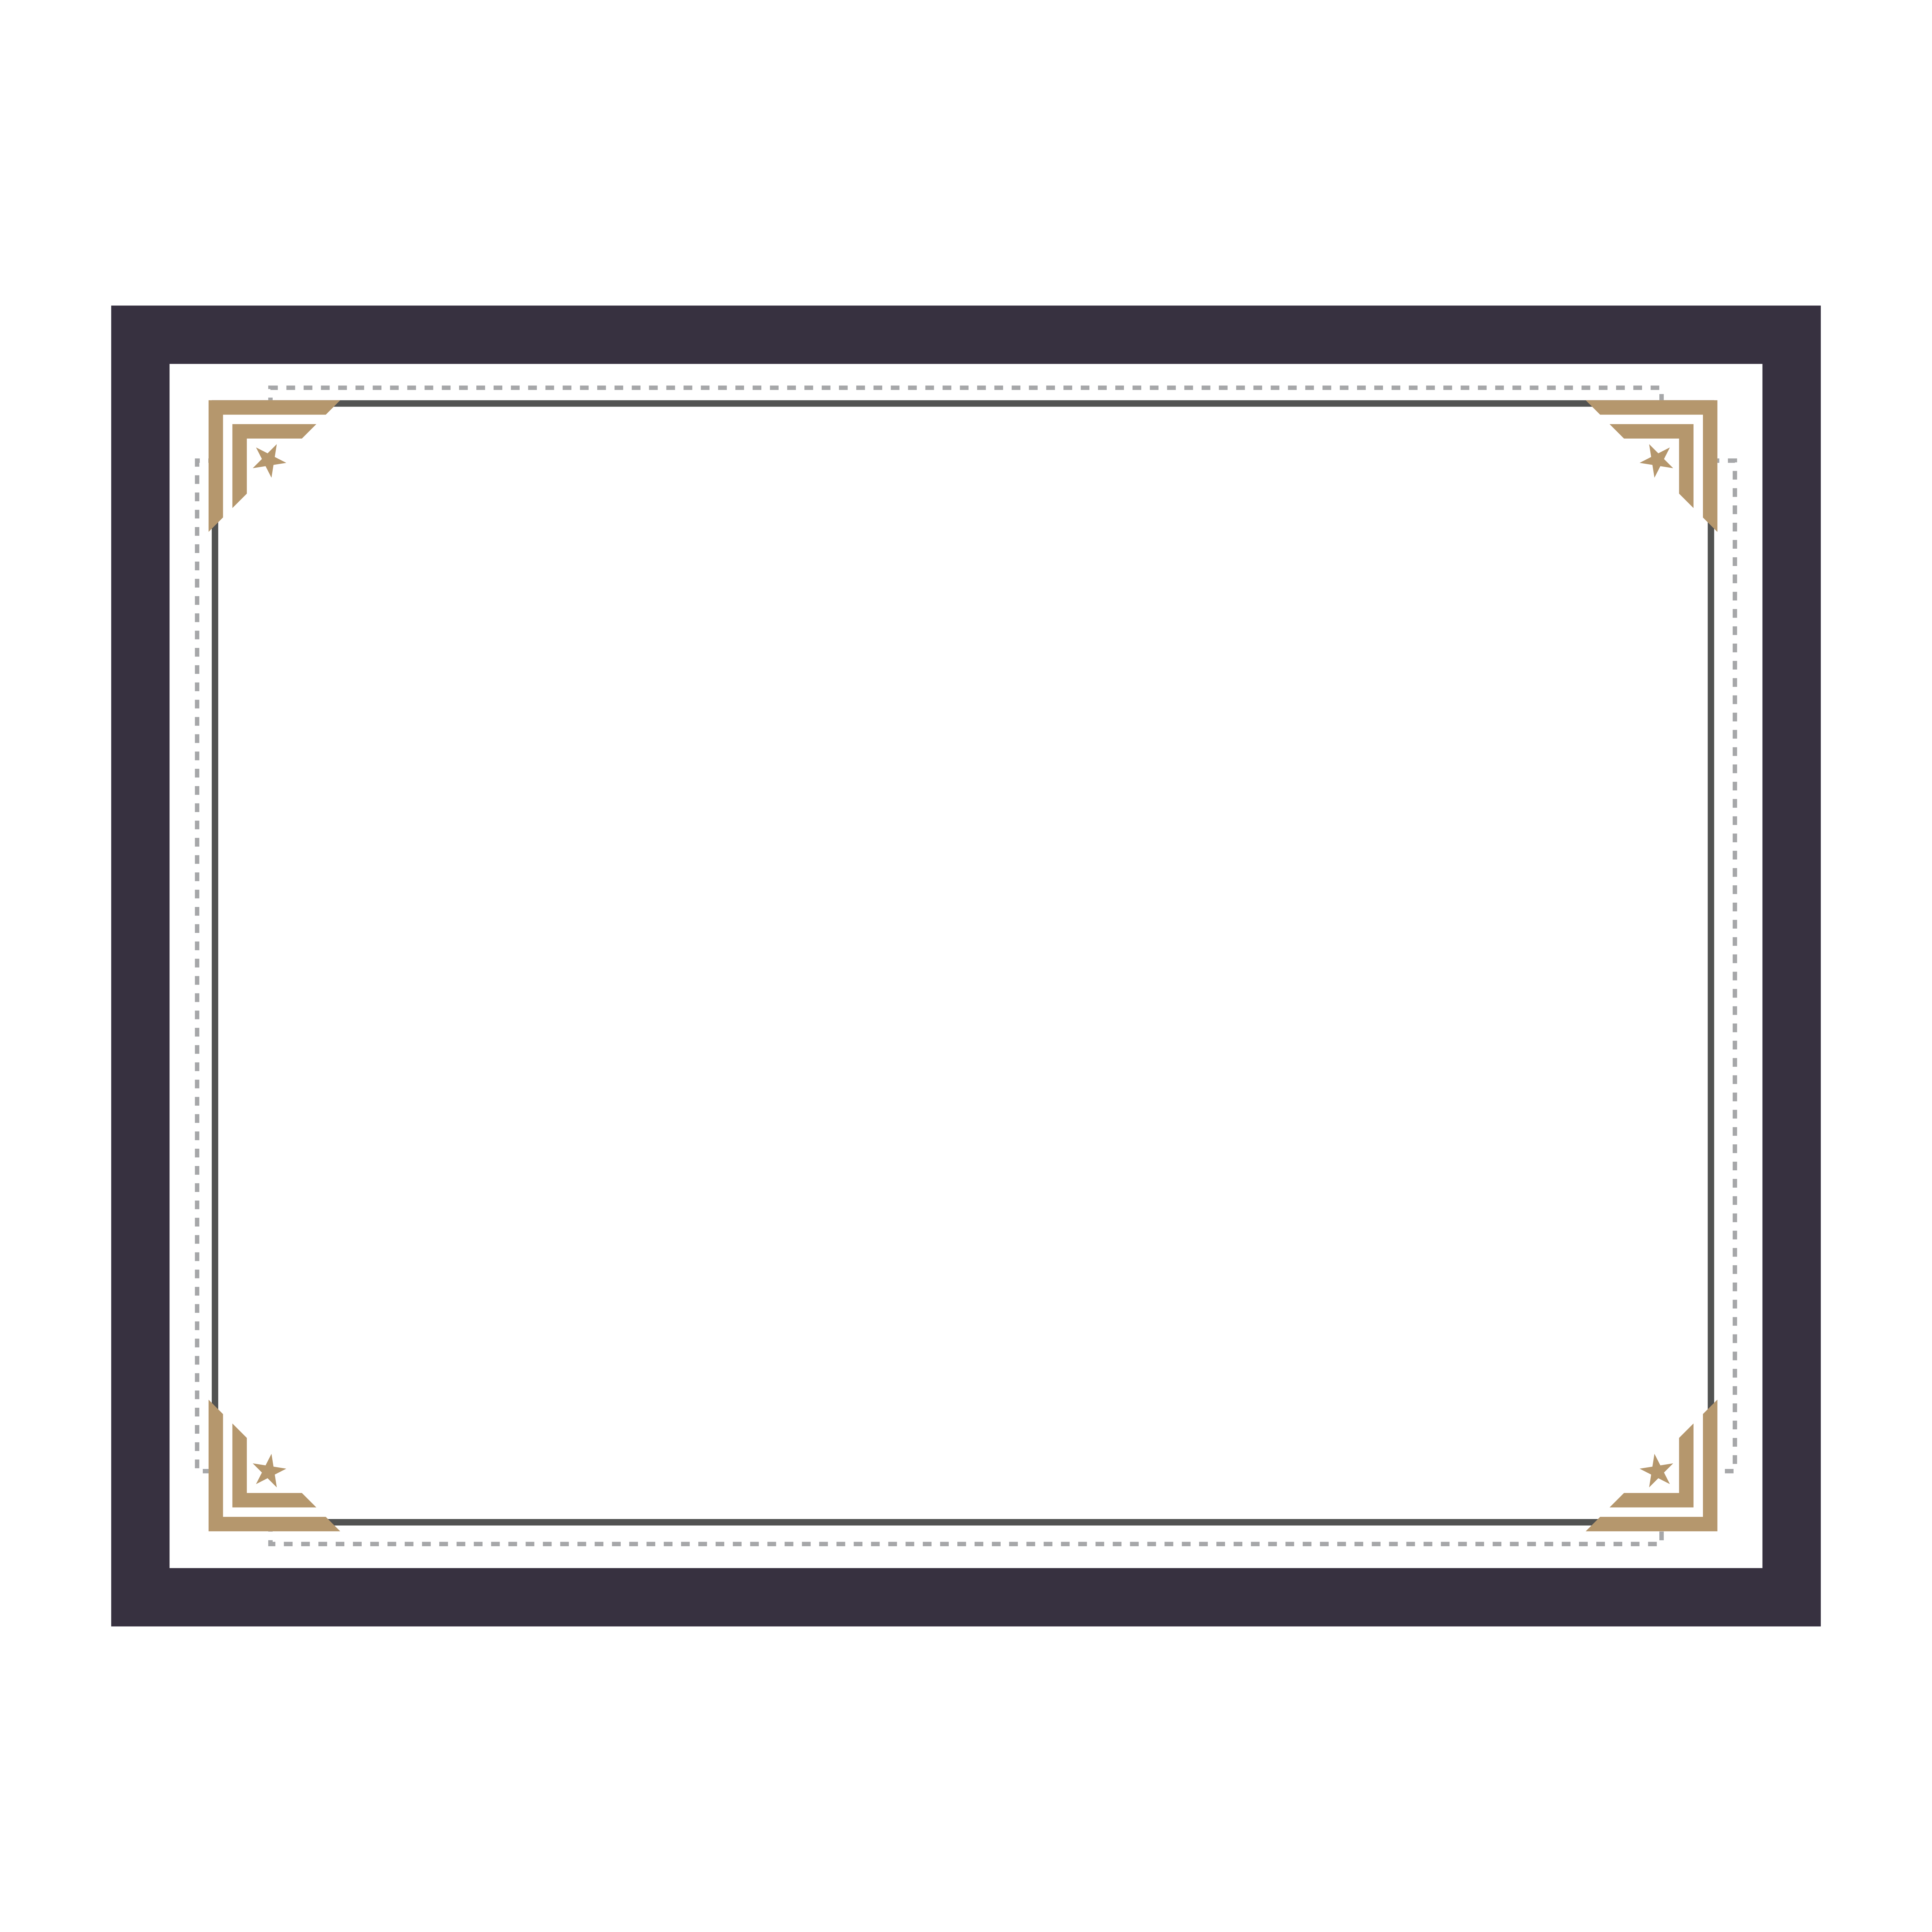 Picture Certificate Text Frame Design Pattern Border Clipart